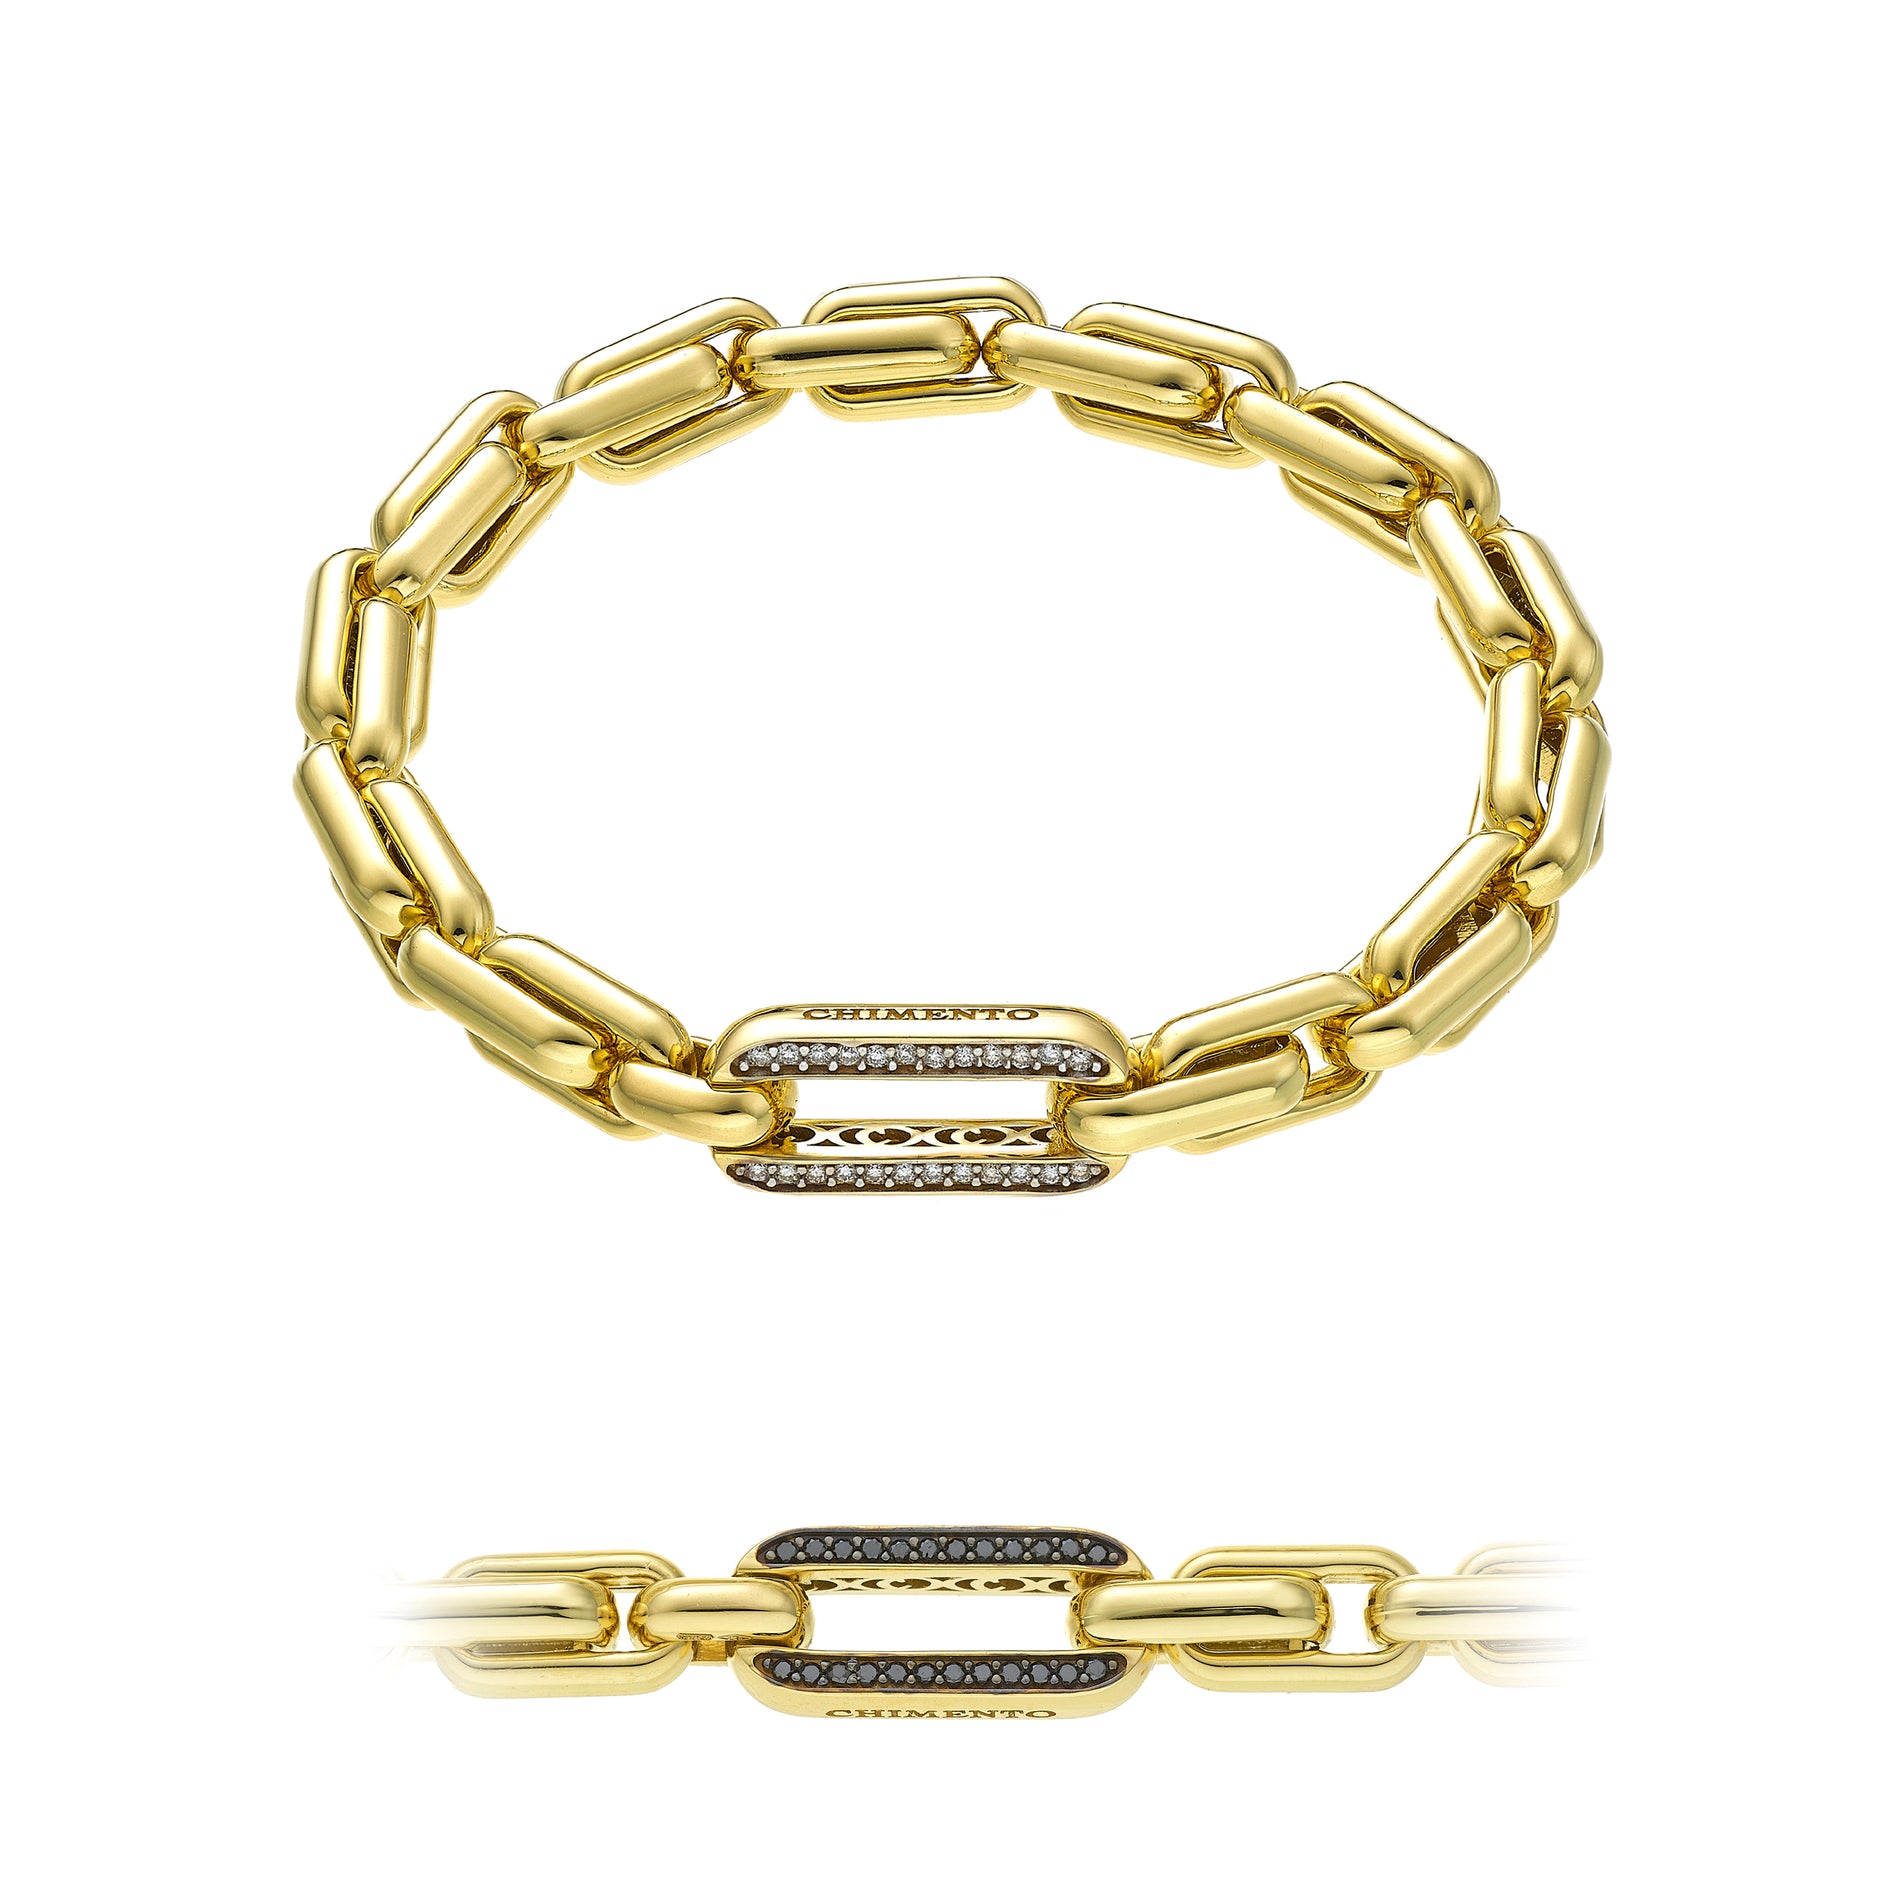 Chimento X-Tend Bracelet (Large) in 18k Yellow Gold with White Diamonds and Black Diamonds - Orsini Jewellers